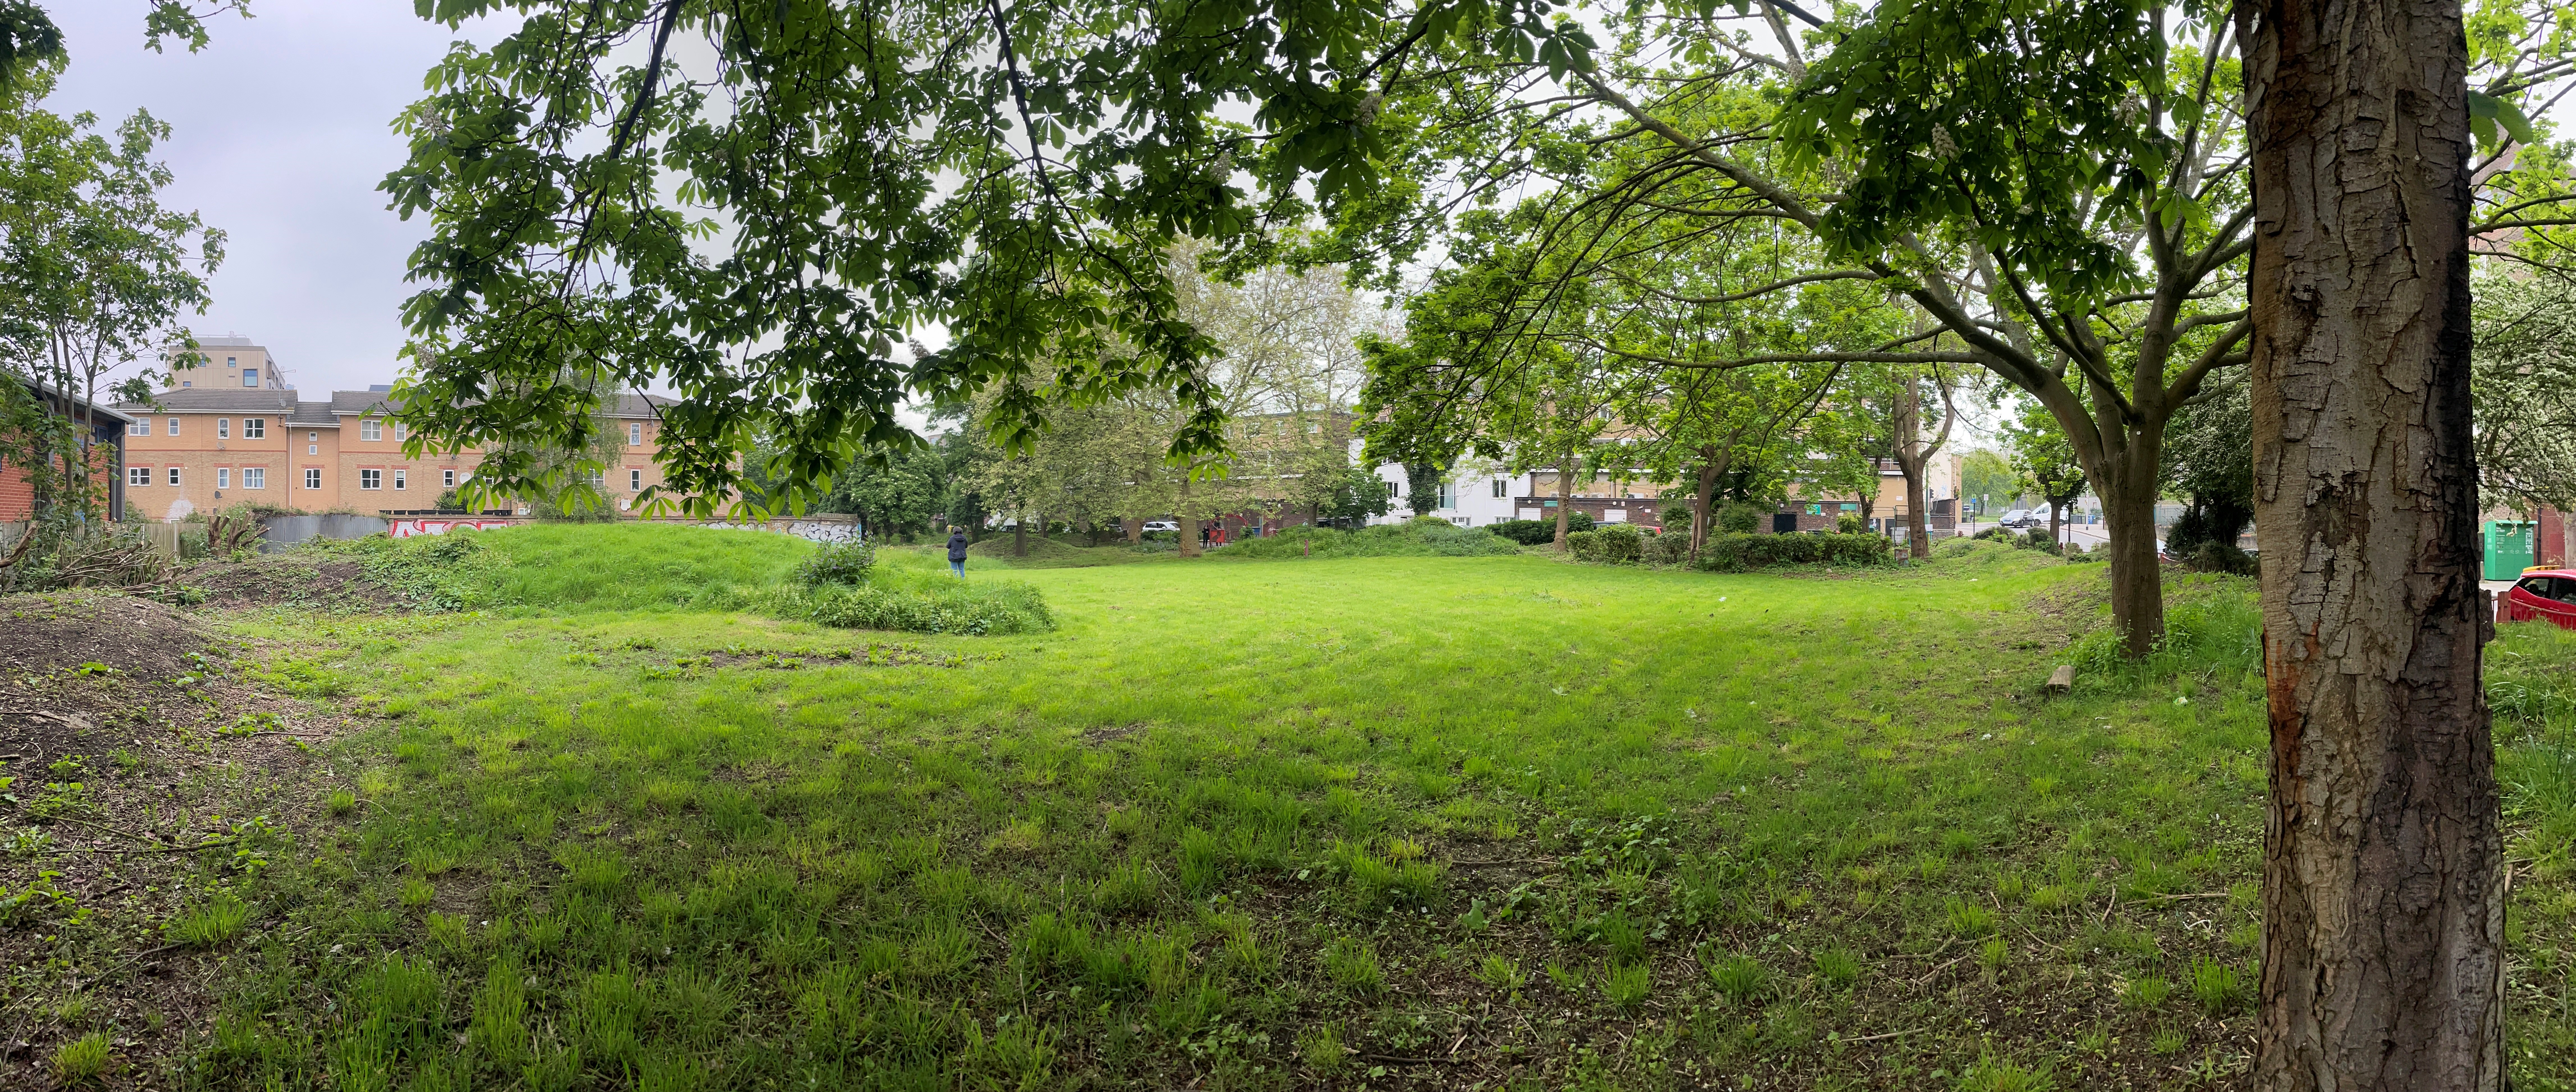 Image of oasis green space